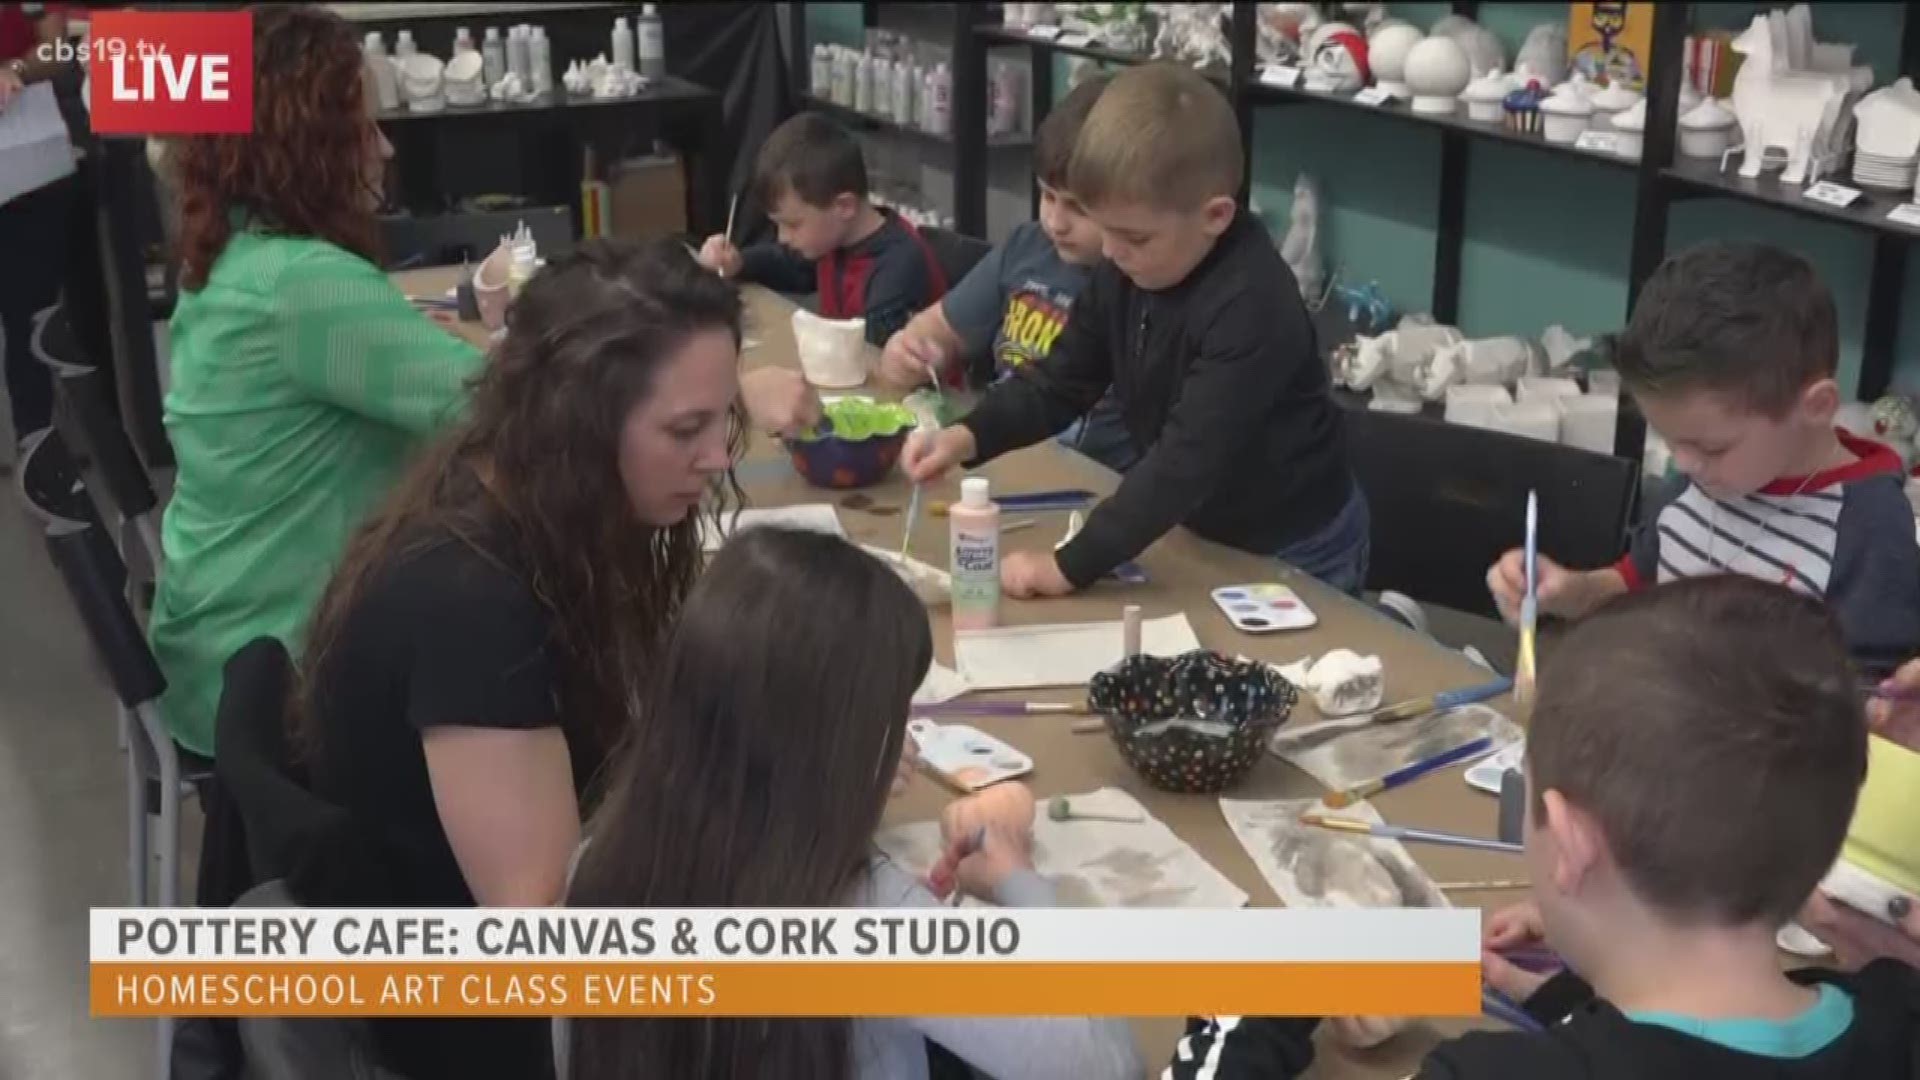 Pottery Cafe helps homeschool kids learn all about art!